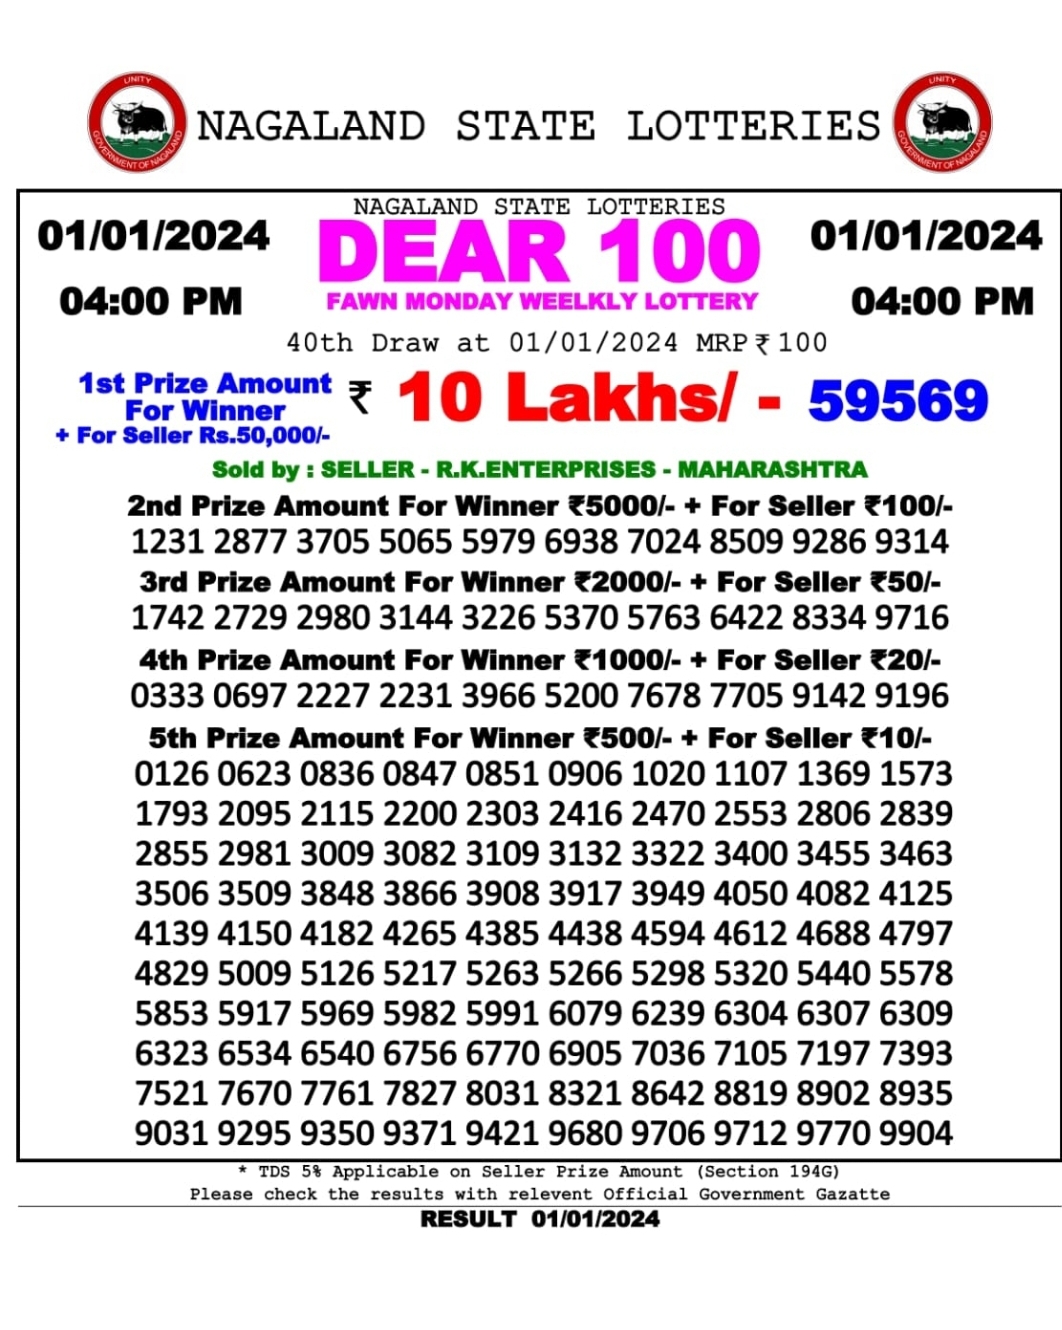 Dear 100 Fawn Monday Weekly lottery draw, 4 pm, 1 Jan 2024 All